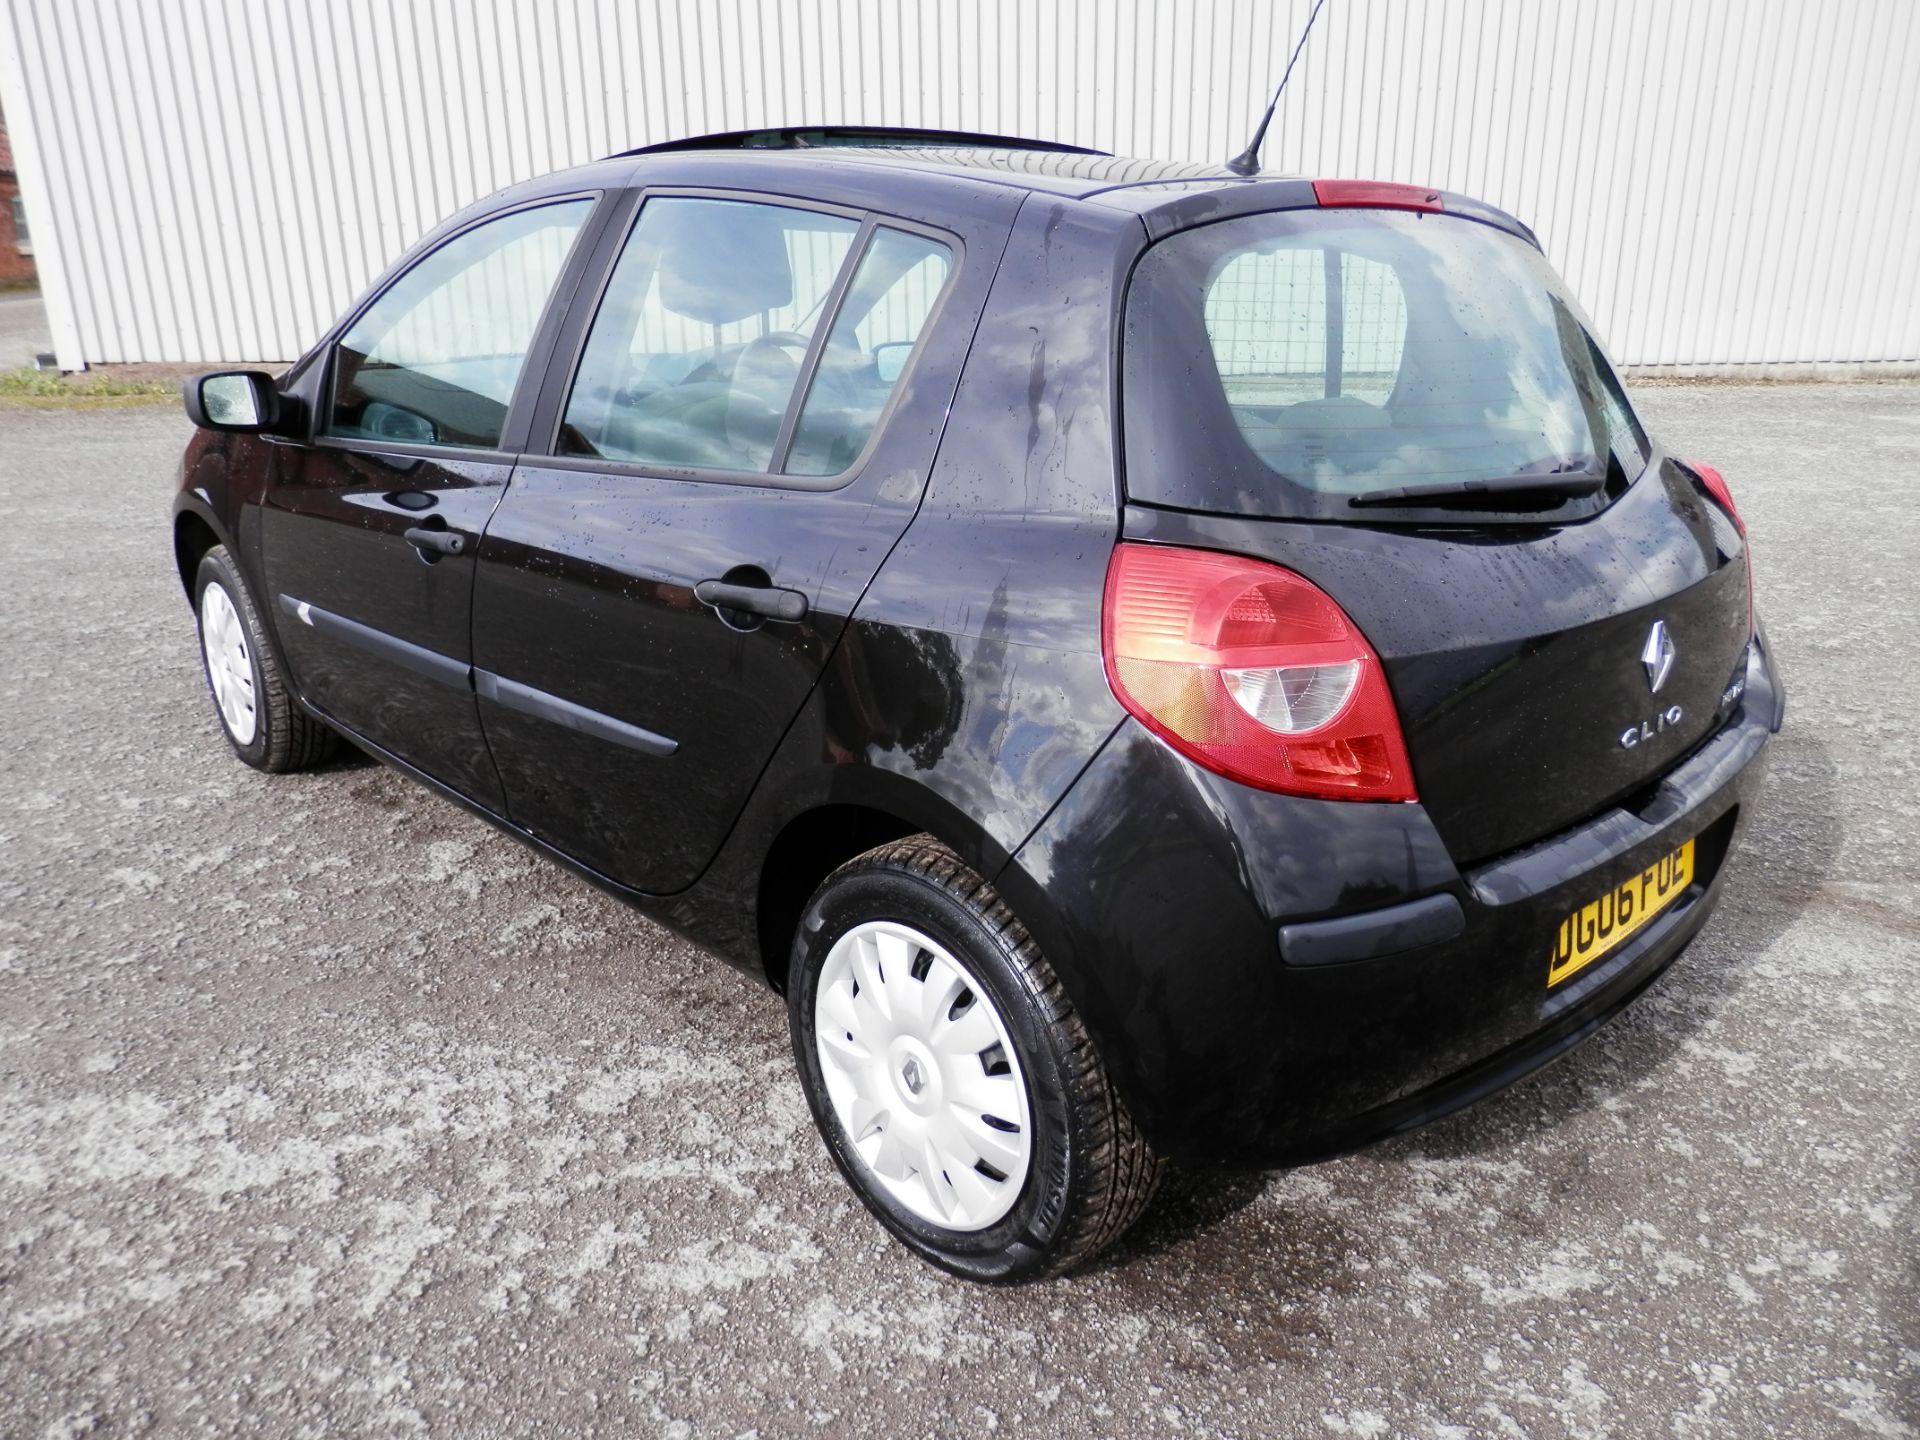 06/2006 RENAULT CLIO (FACELIFT MODEL) 1.4 EXPRESSION 16 VALVE, AIR CON, ONLY 47K MILES WARRANTED. - Image 5 of 26